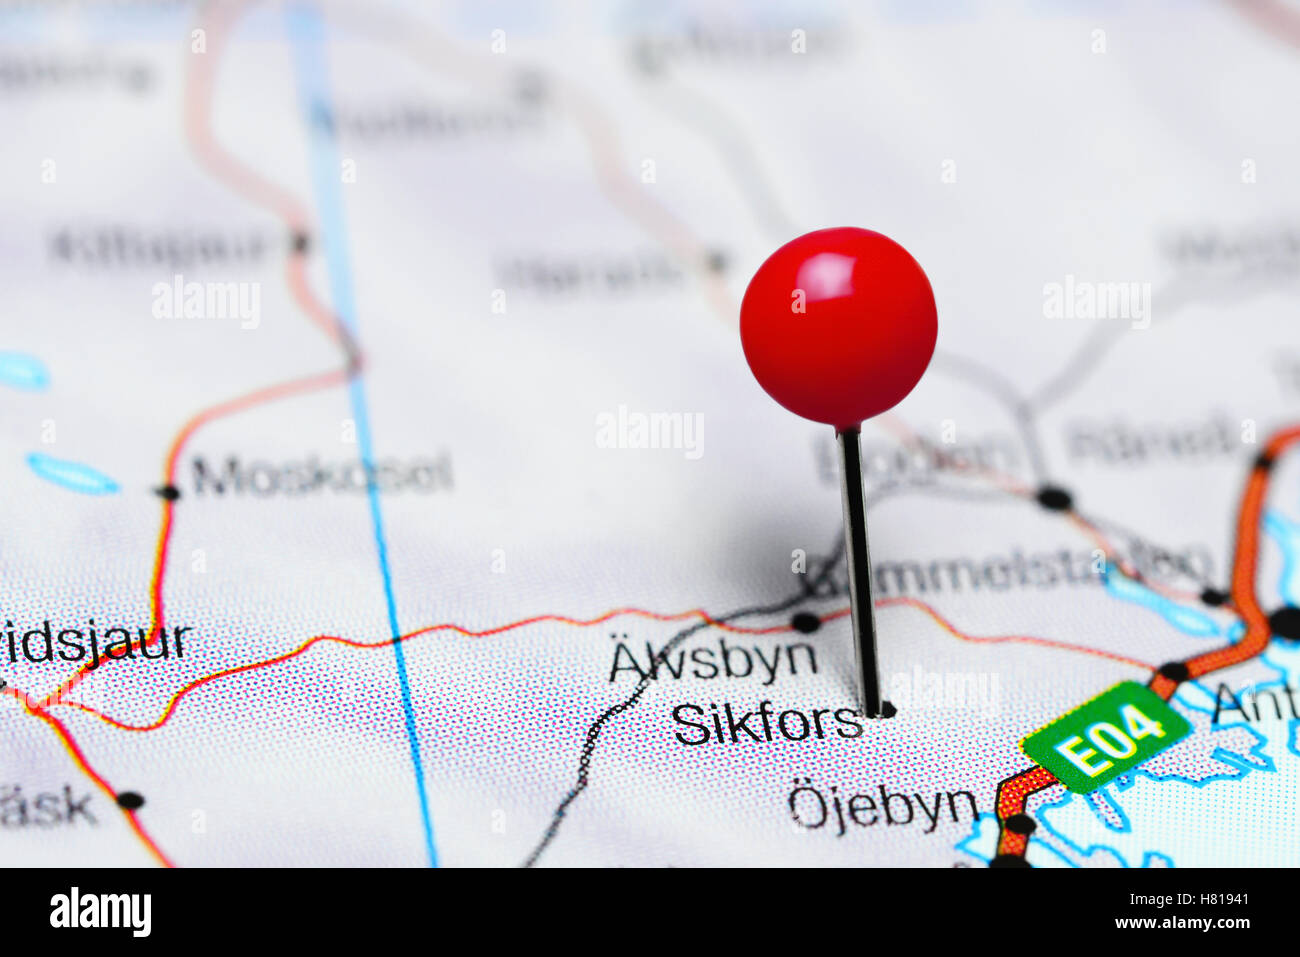 Sikfors pinned on a map of Sweden Stock Photo